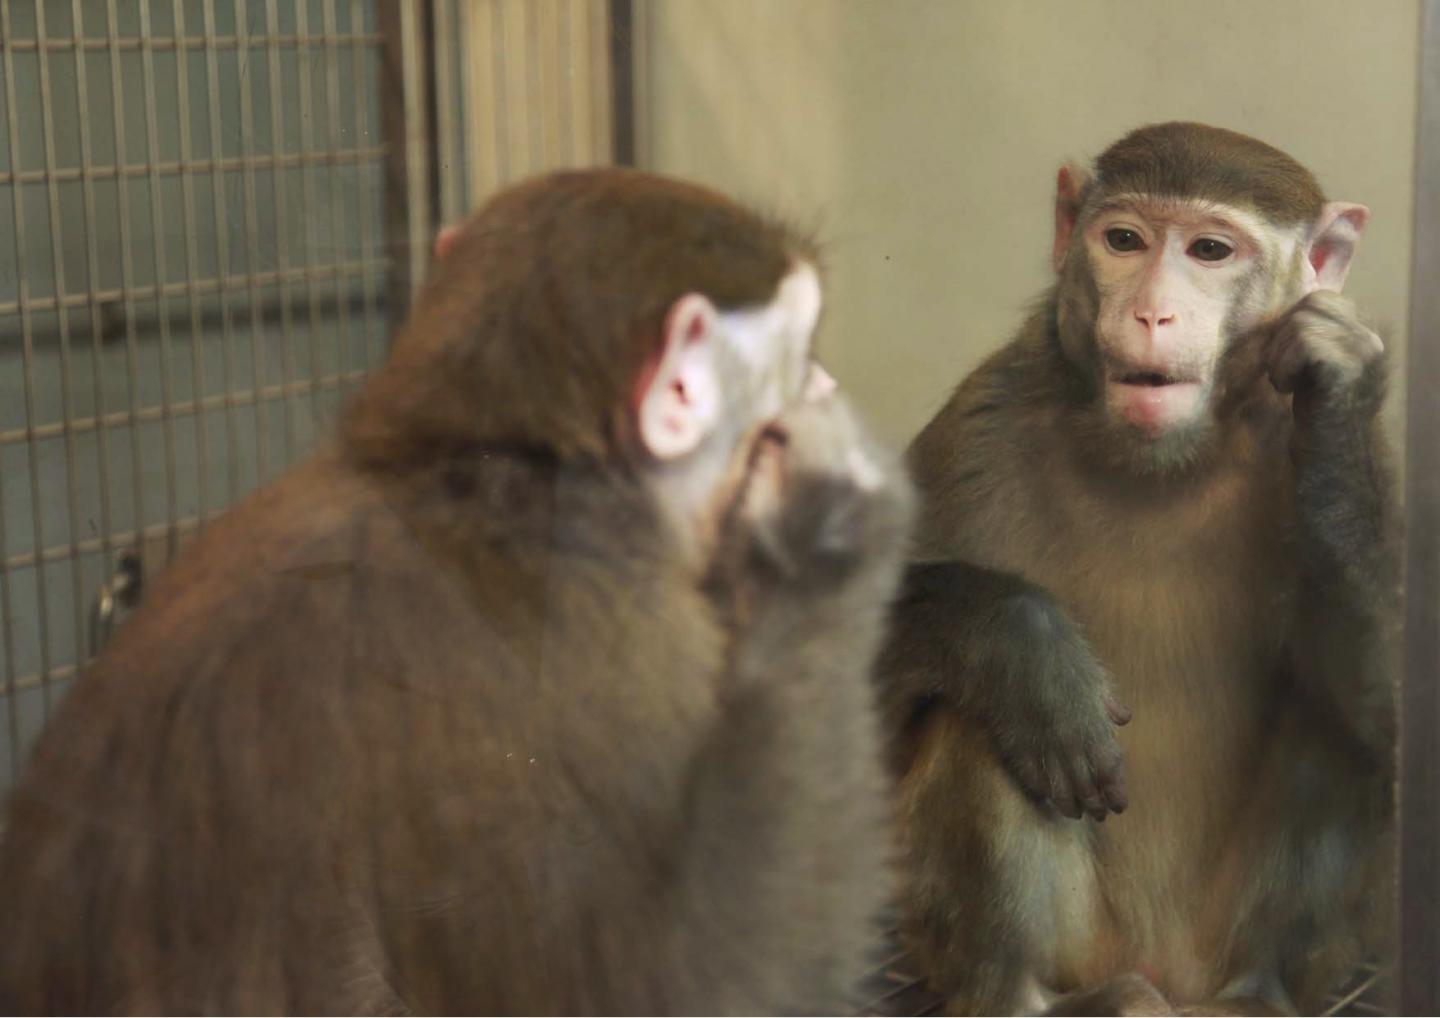 Rhesus Monkeys Can Learn to Recognize Themselves in the Mirror 2